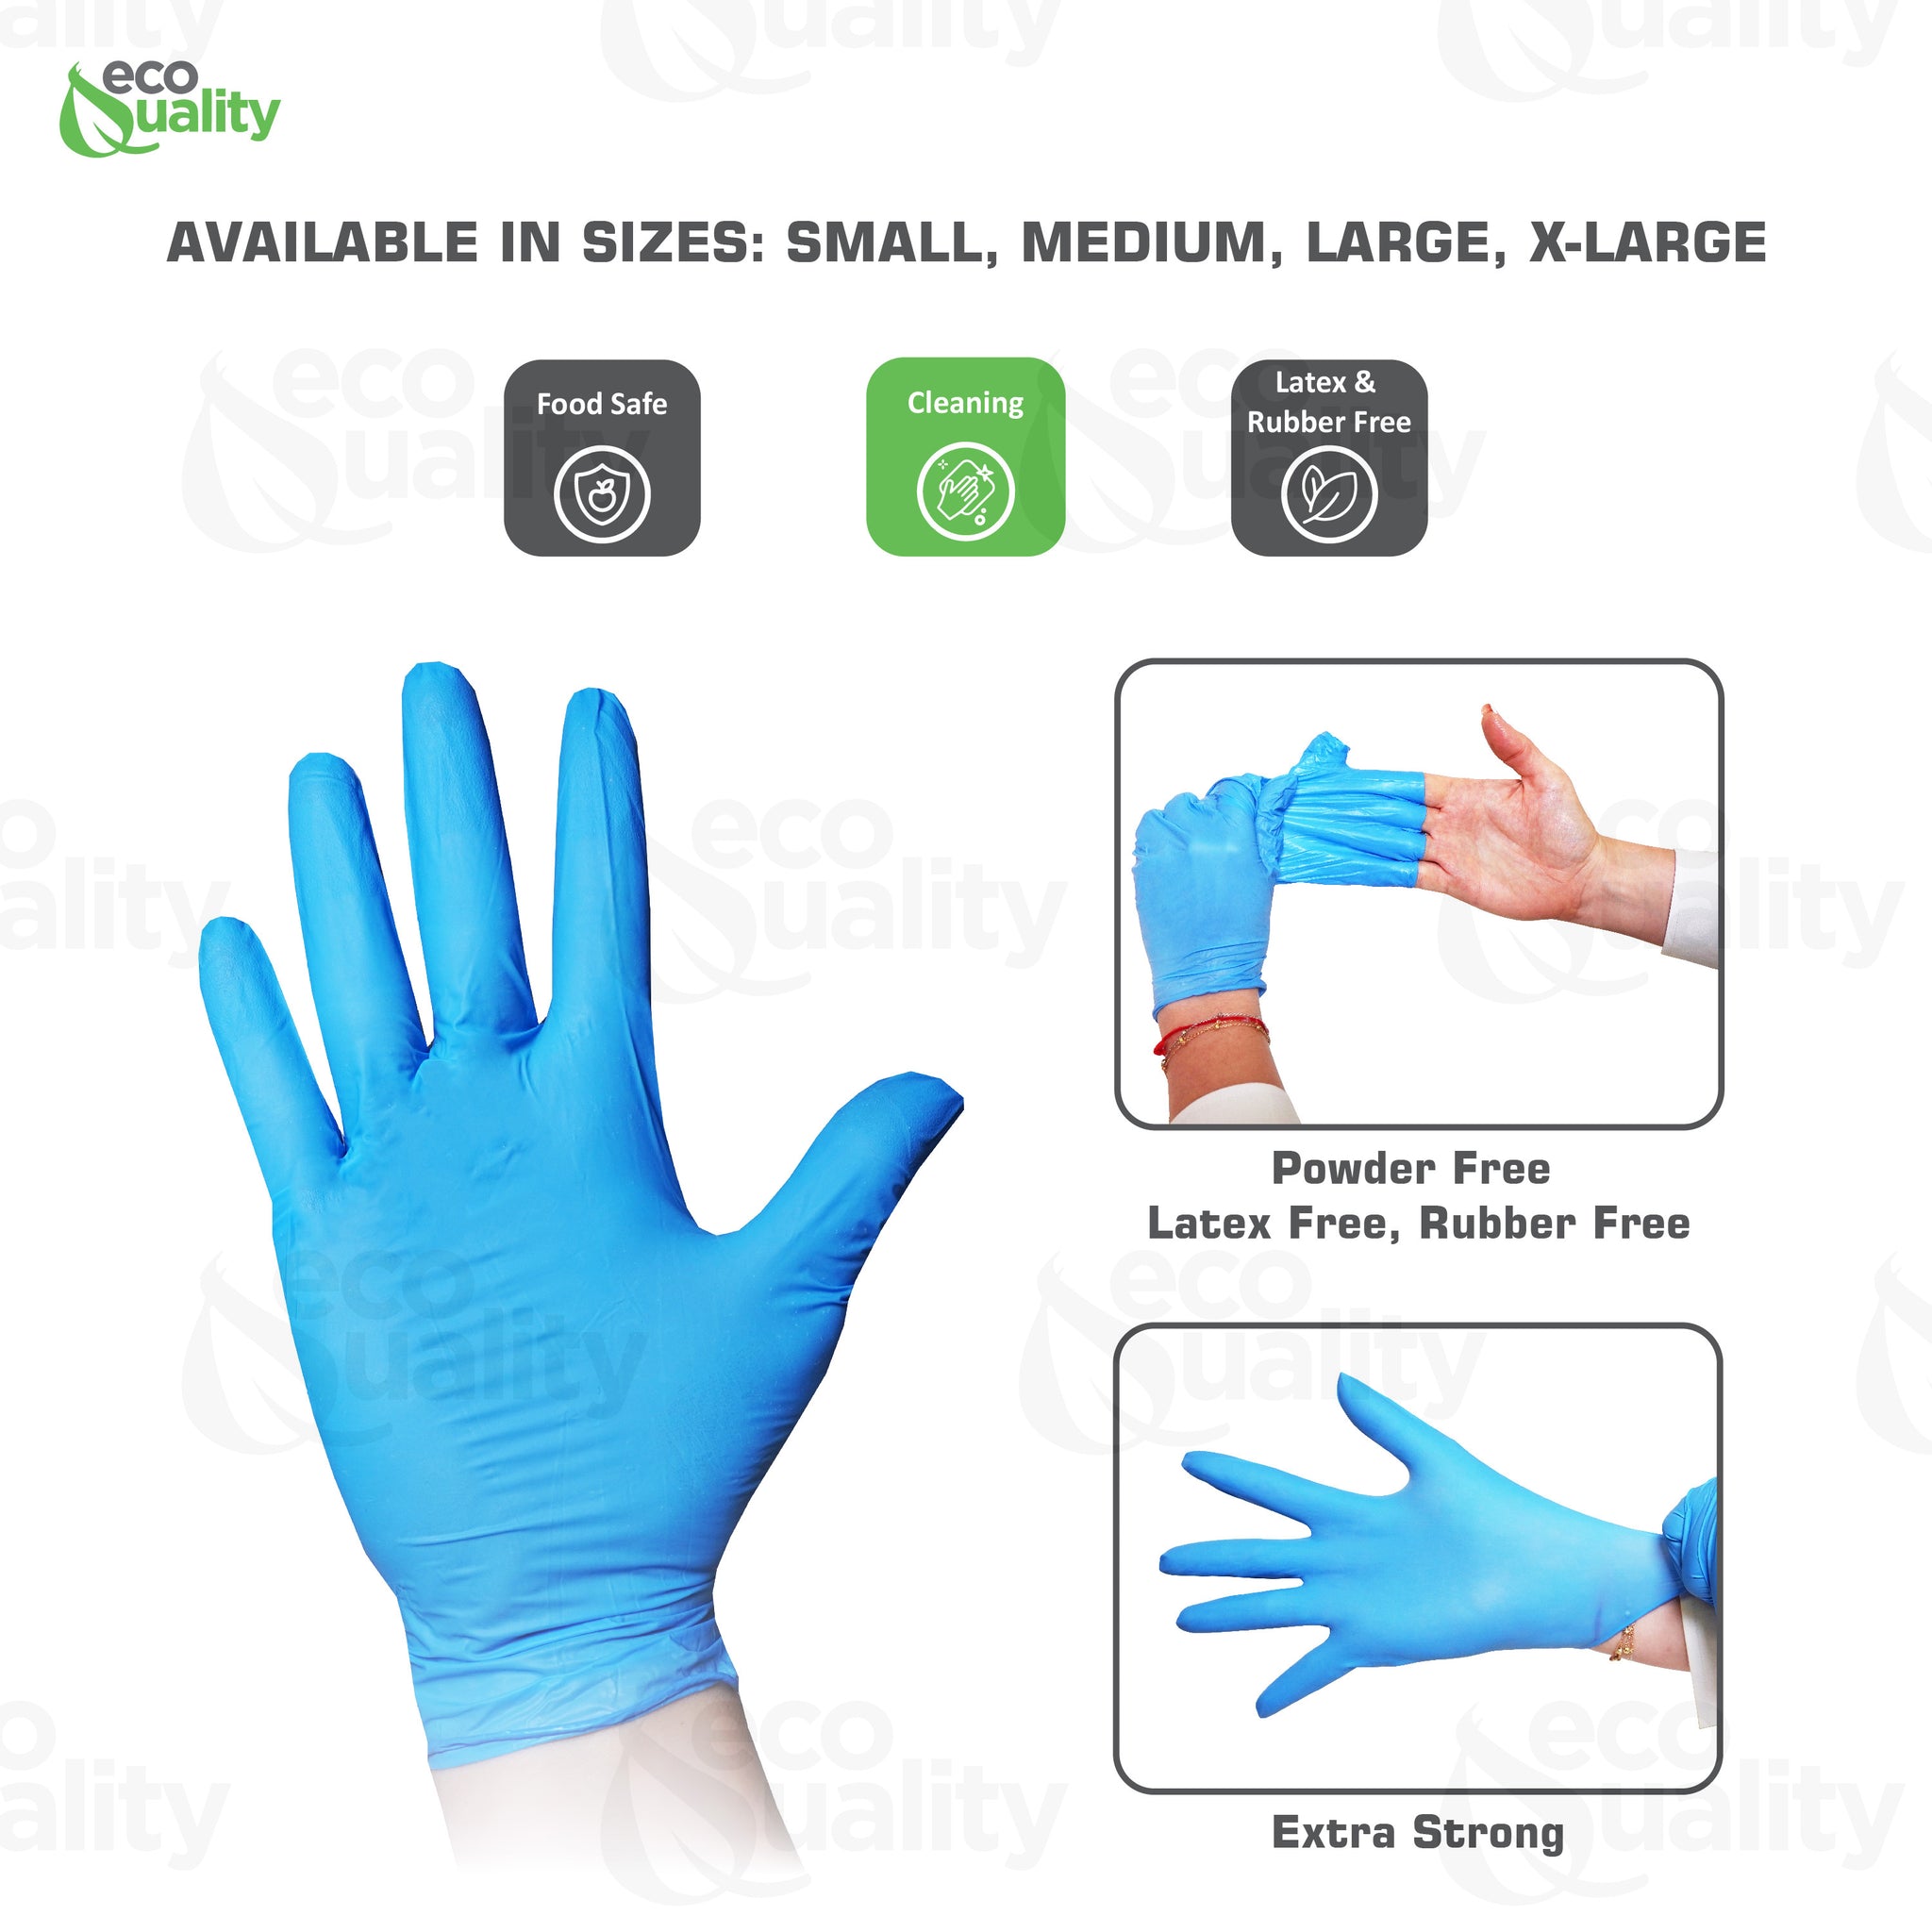 Tattoo Cleaning Cooking Mechanic Exam Gloves  stretchable durability and puncture resistance  Small  Restaurant  professional gloves  Nitrile Gloves  Mechanic Gloves  Latex Free Gloves  Janitorial Supplies  janitorial  Heavy Duty  Gloves  Glove  dispenser box  Cleaning Gloves  Cleaning & Janitorial Supplies  Chemical Resistance  Blue Powder Rubber Latex Protein Free